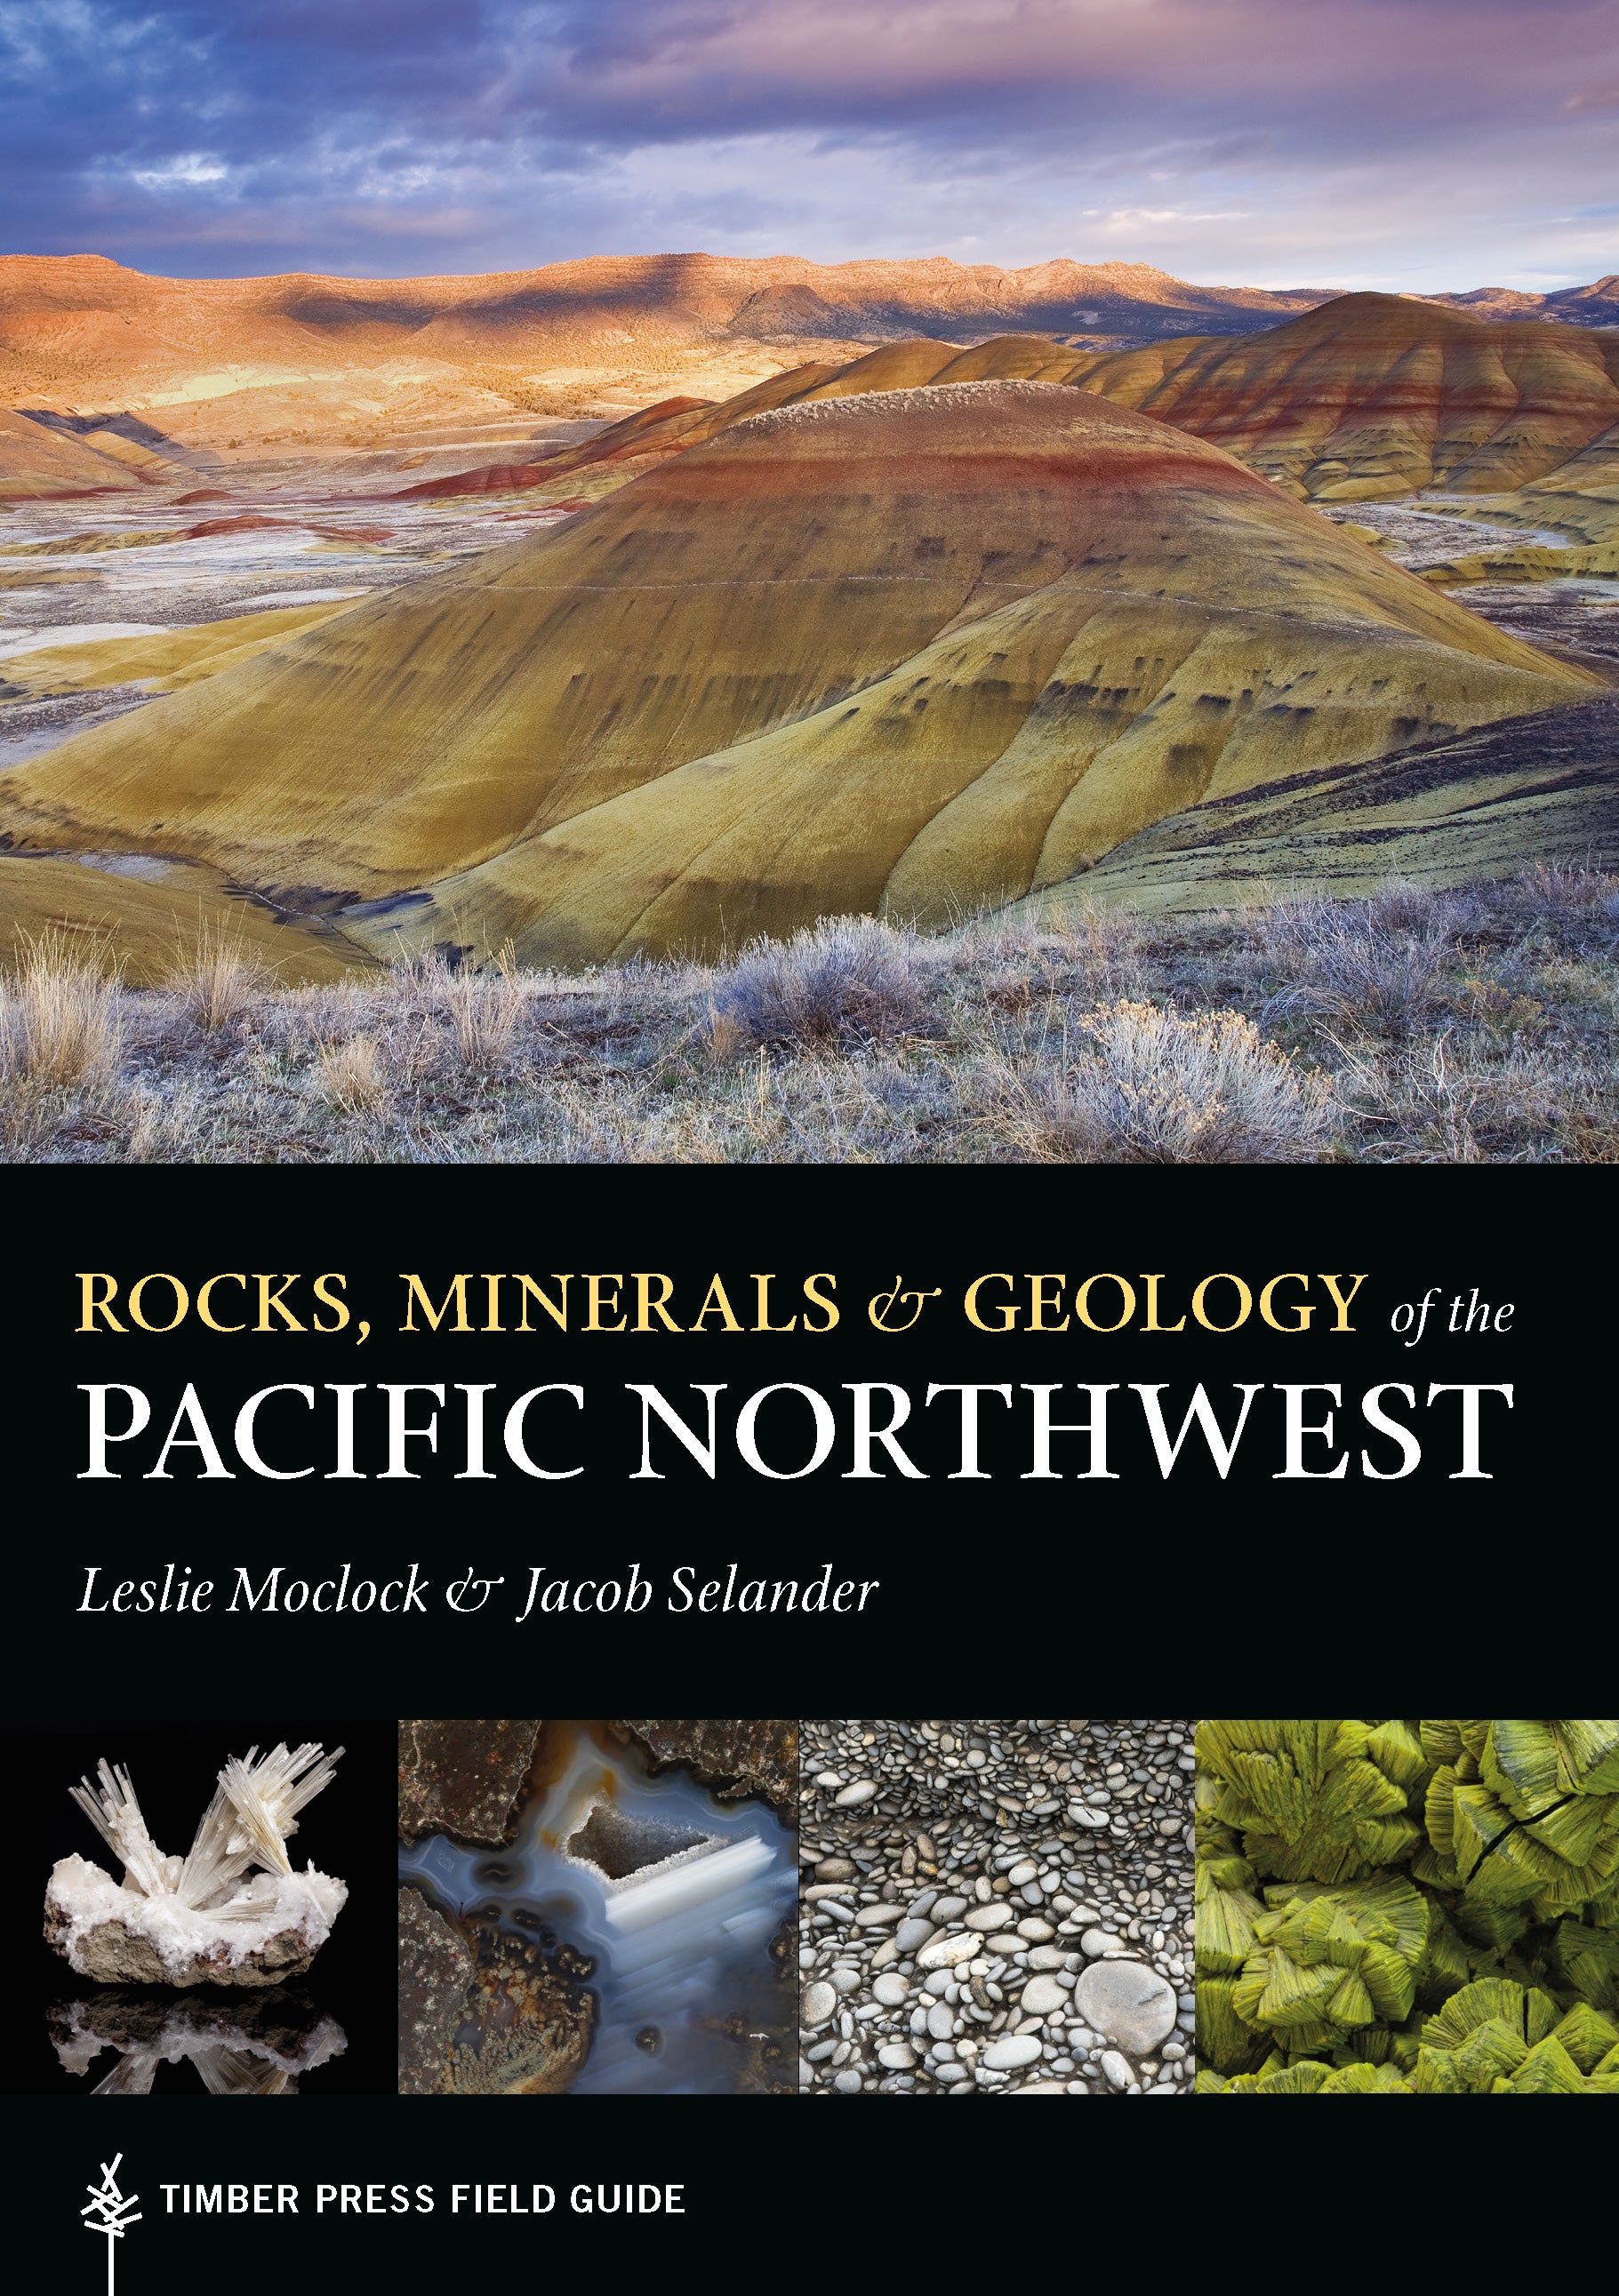 The cover has multiple images, including the Painted Hills and various rocks like geodes